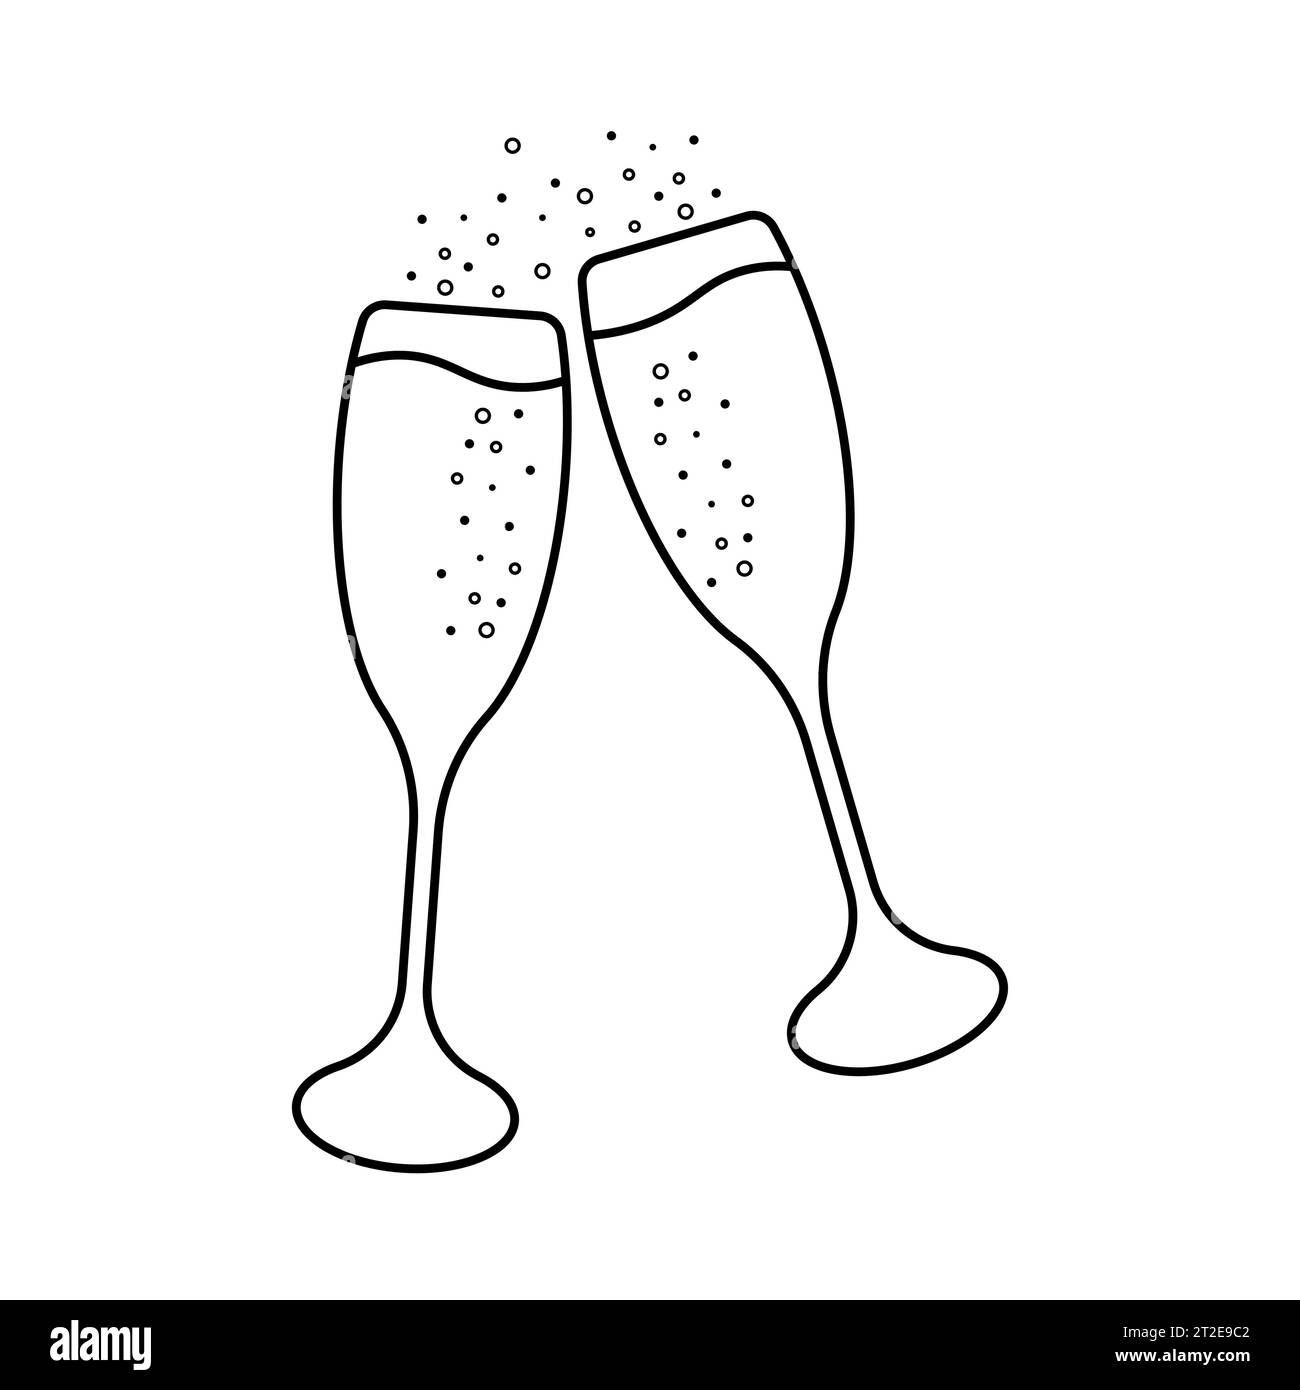 Two Glasses of Champagne Silhouette.Champagne glass icon. Party drink silhouette.Vector illustration. Stock Vector